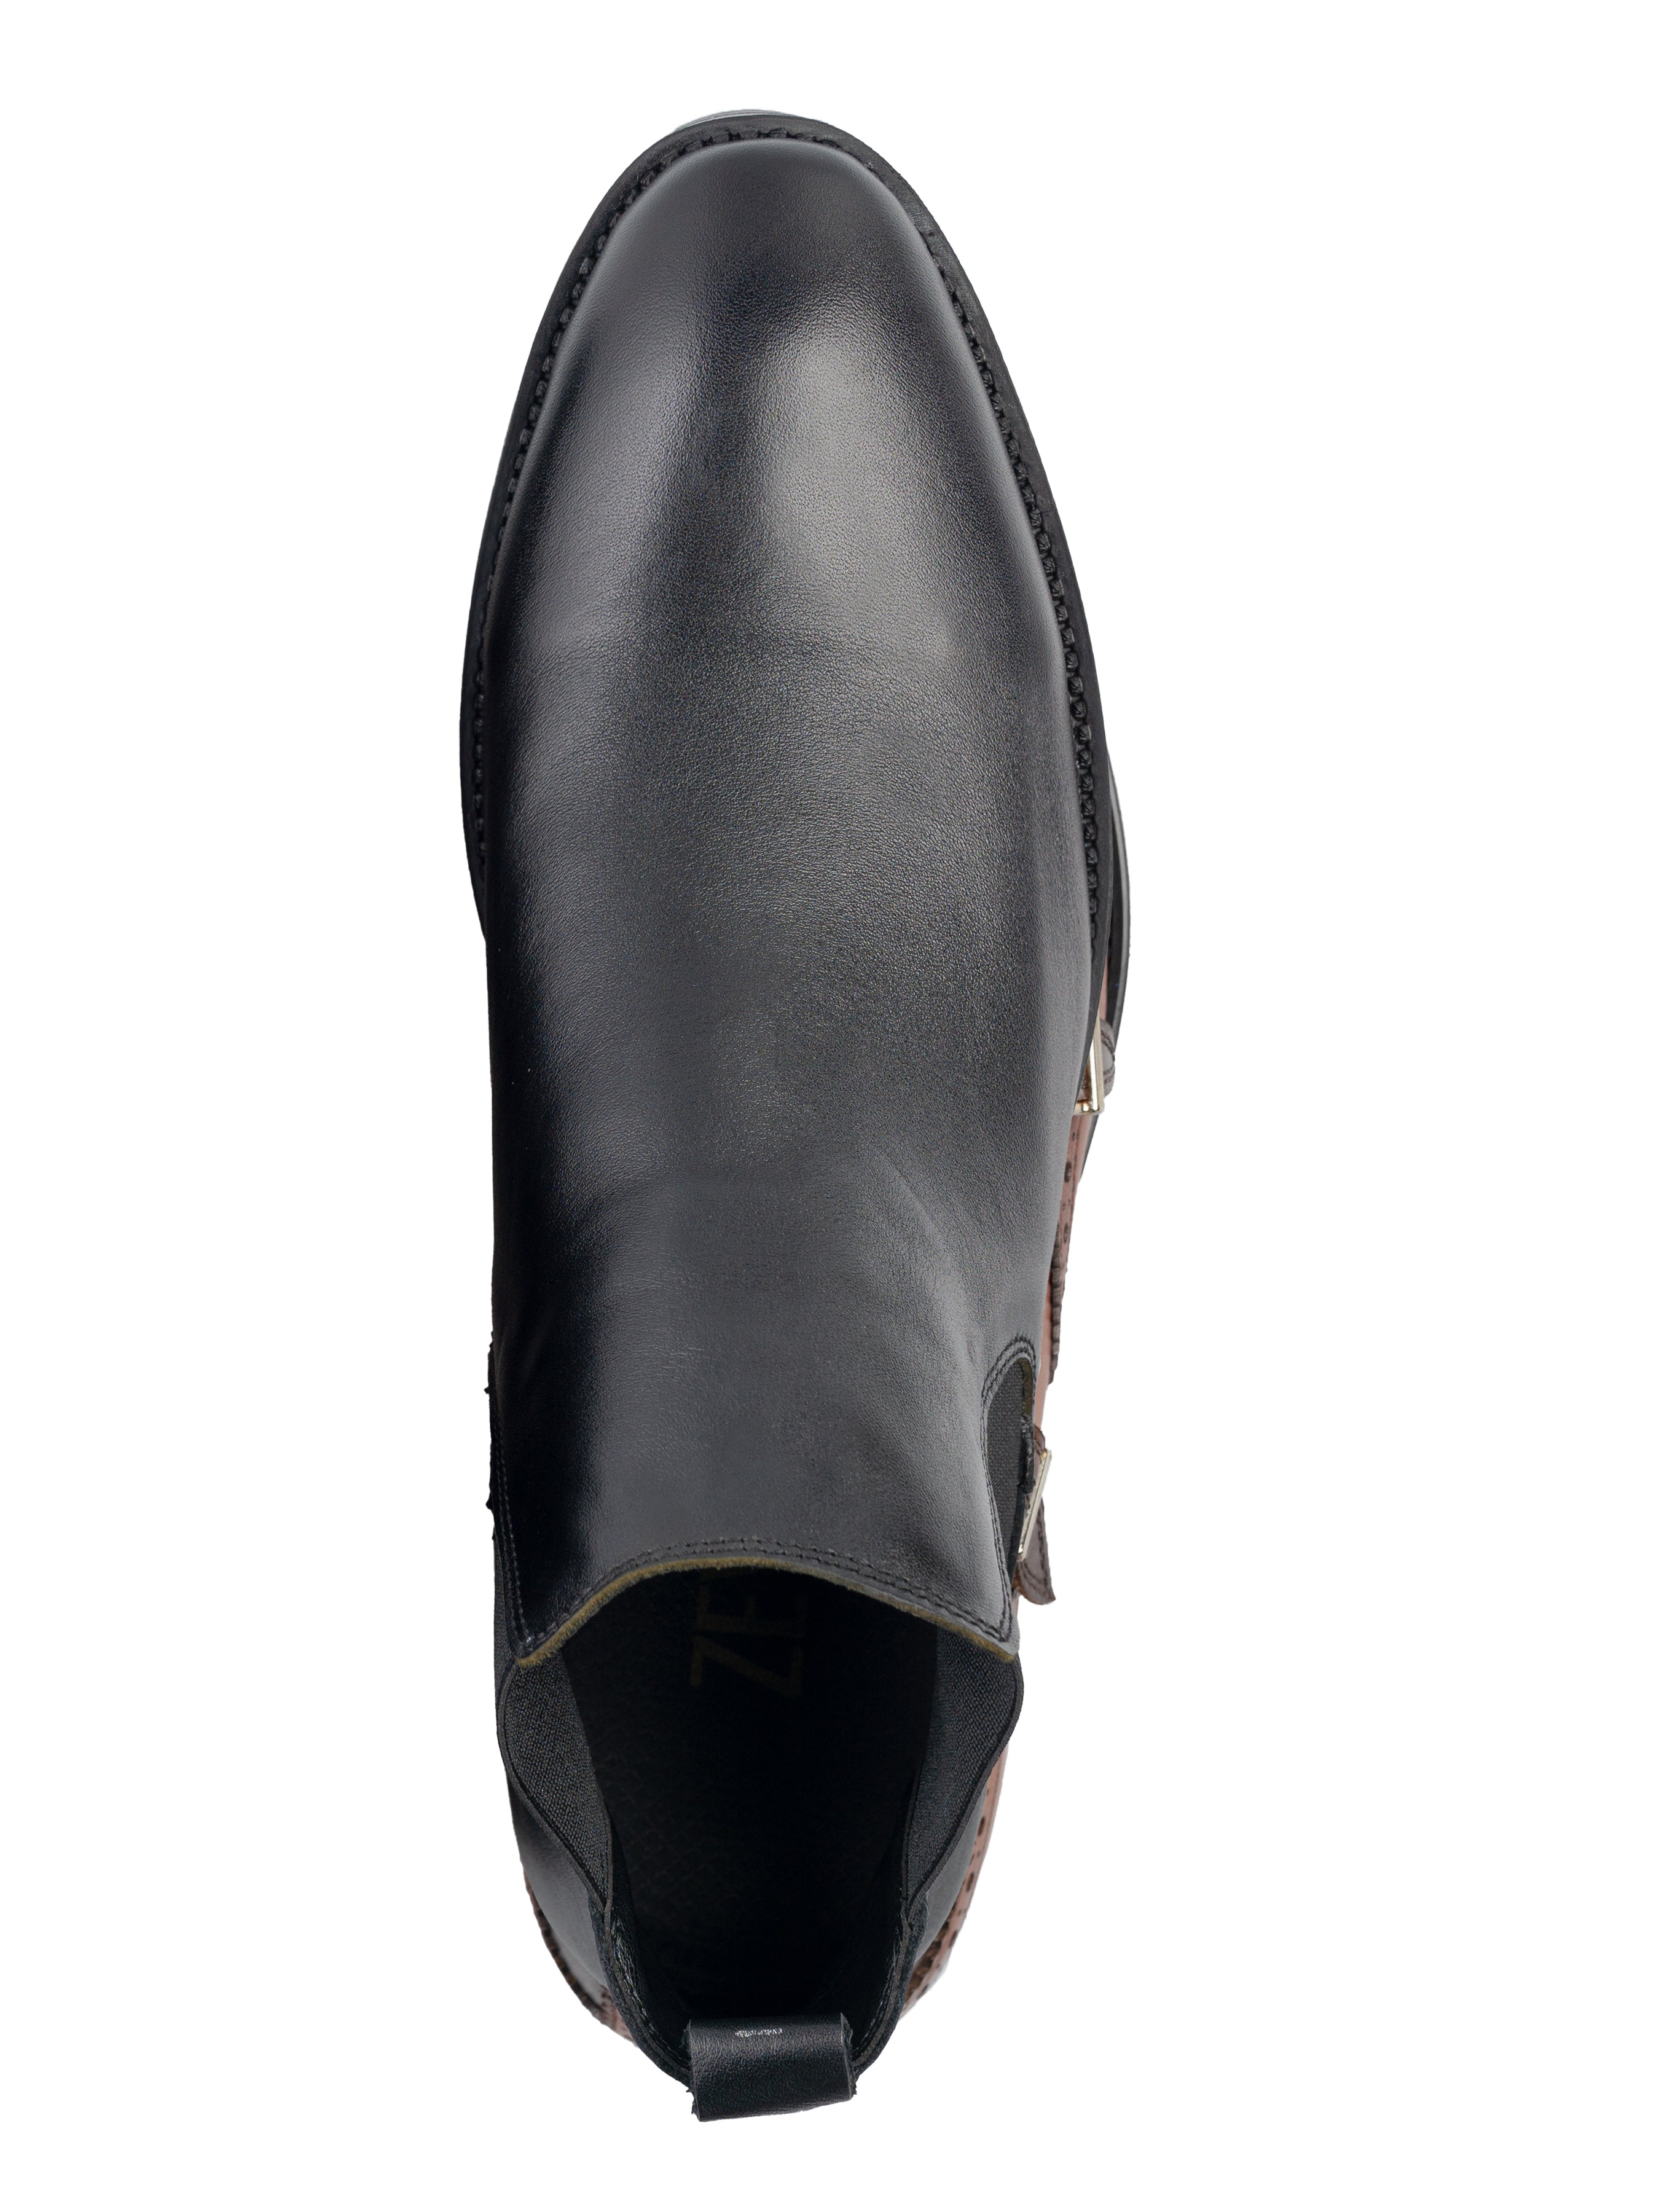 Chelsea Boots - Black Polished Leather (Crepe Sole)